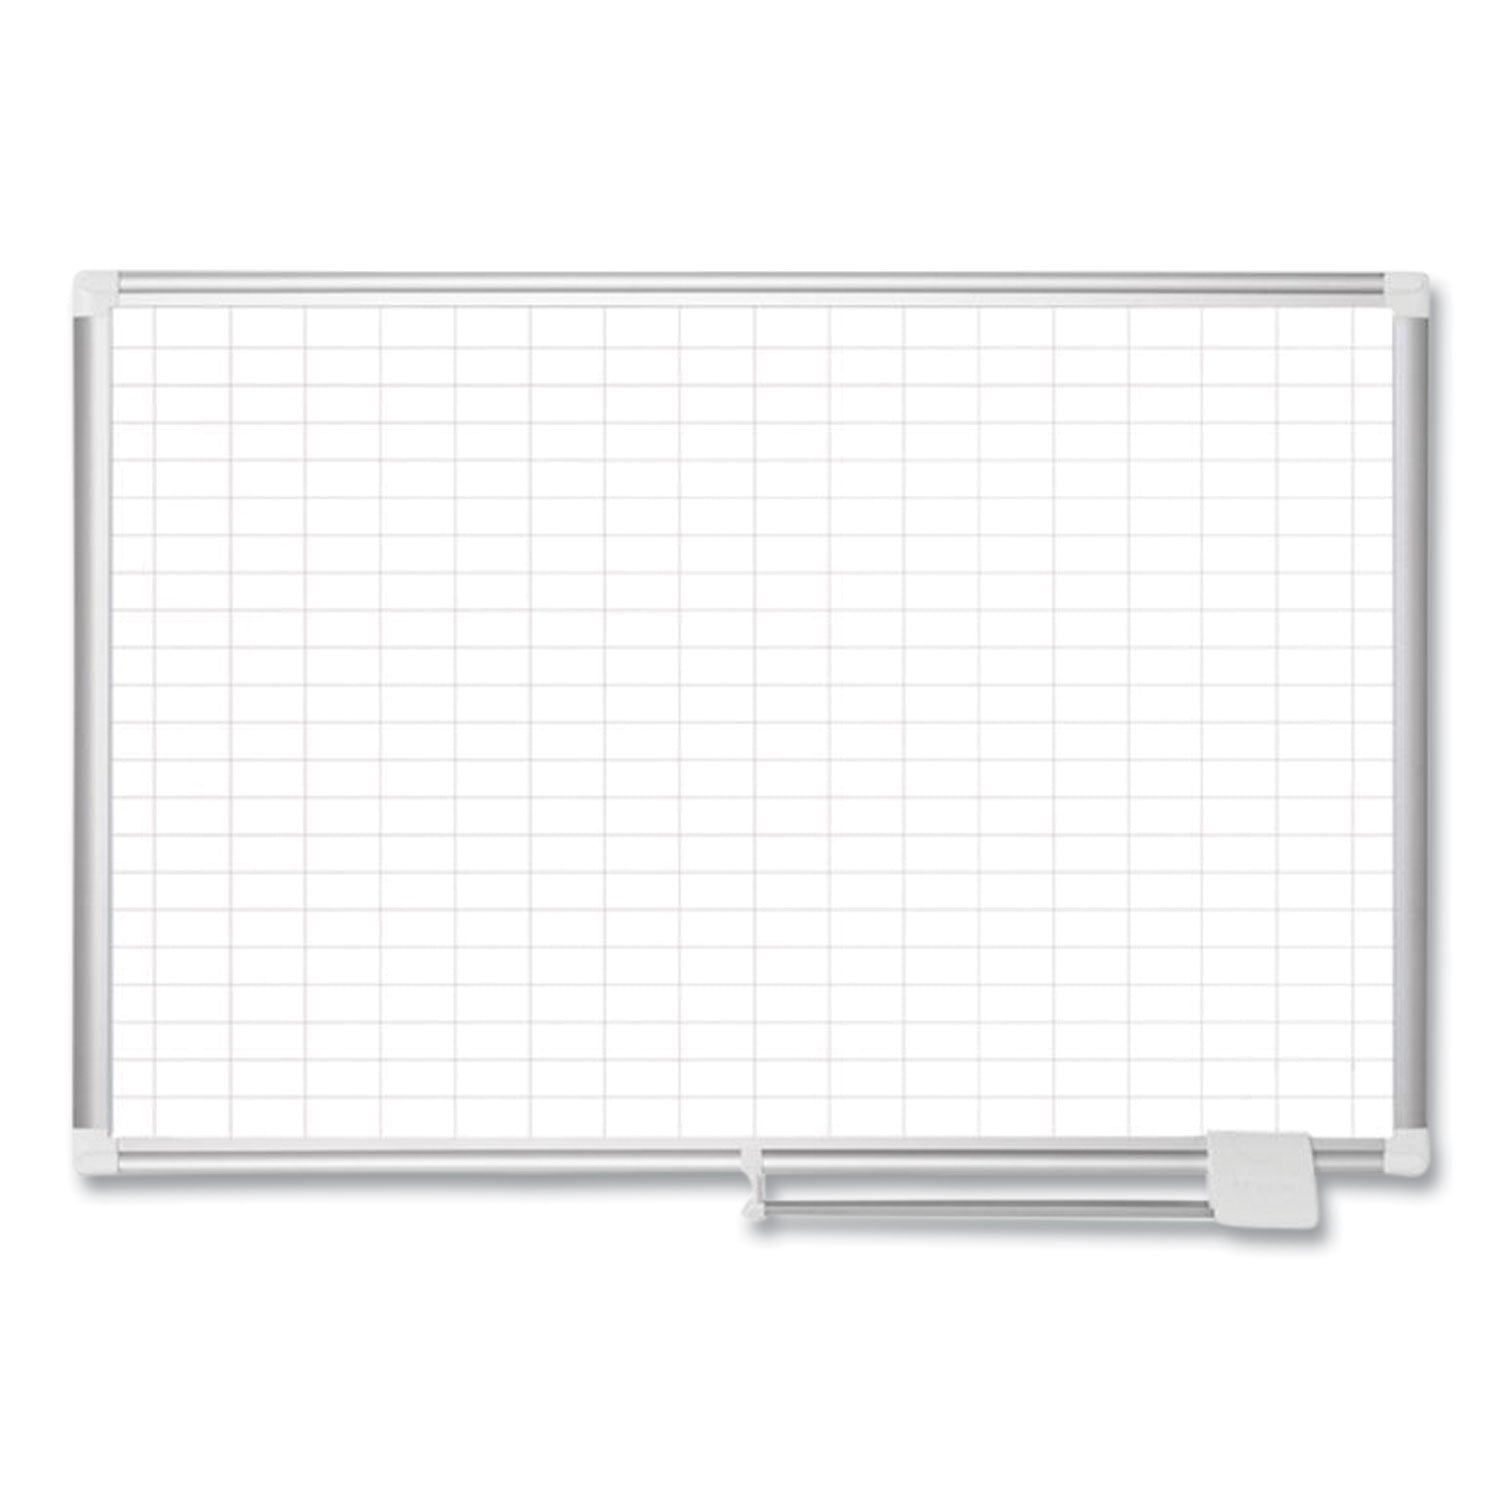 Gridded Magnetic Steel Dry Erase Planning Board, 1 x 2 Grid, 72 x 48, White Surface, Silver Aluminum Frame - 